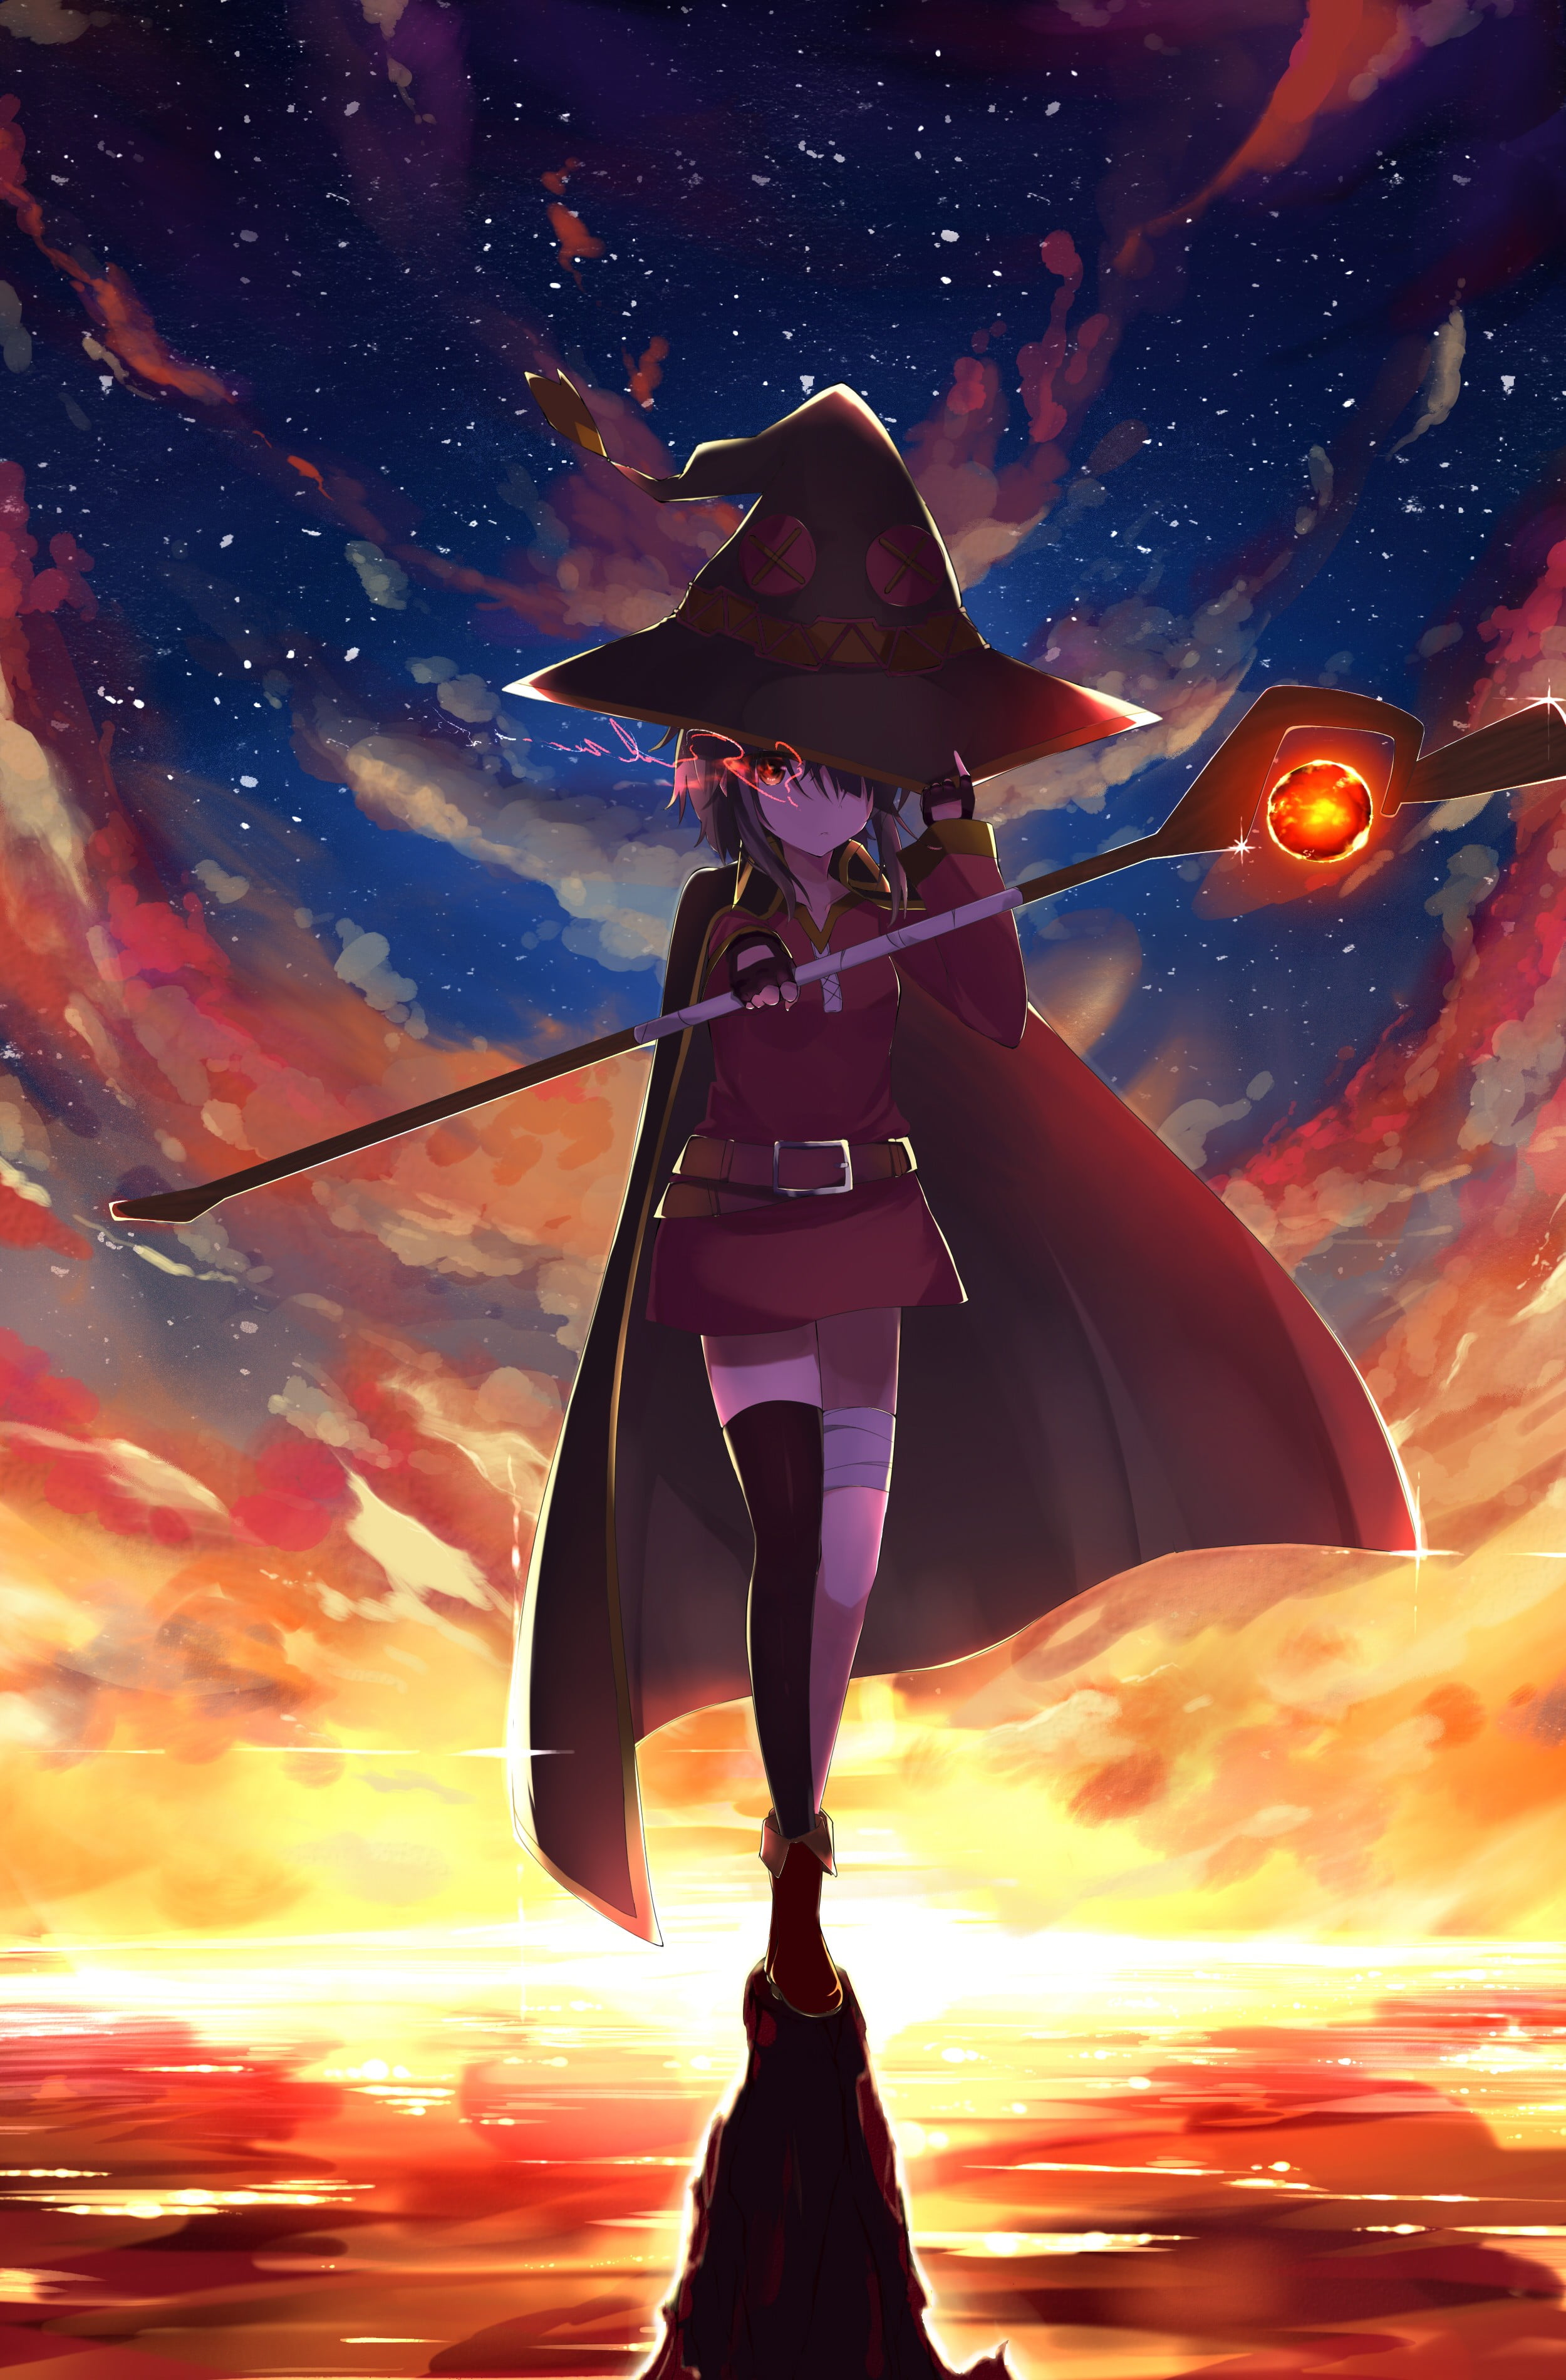 Pretty witch Original anime character digital 04 Nov 2018Random Anime  Arts rARTs Collection of anime pictures